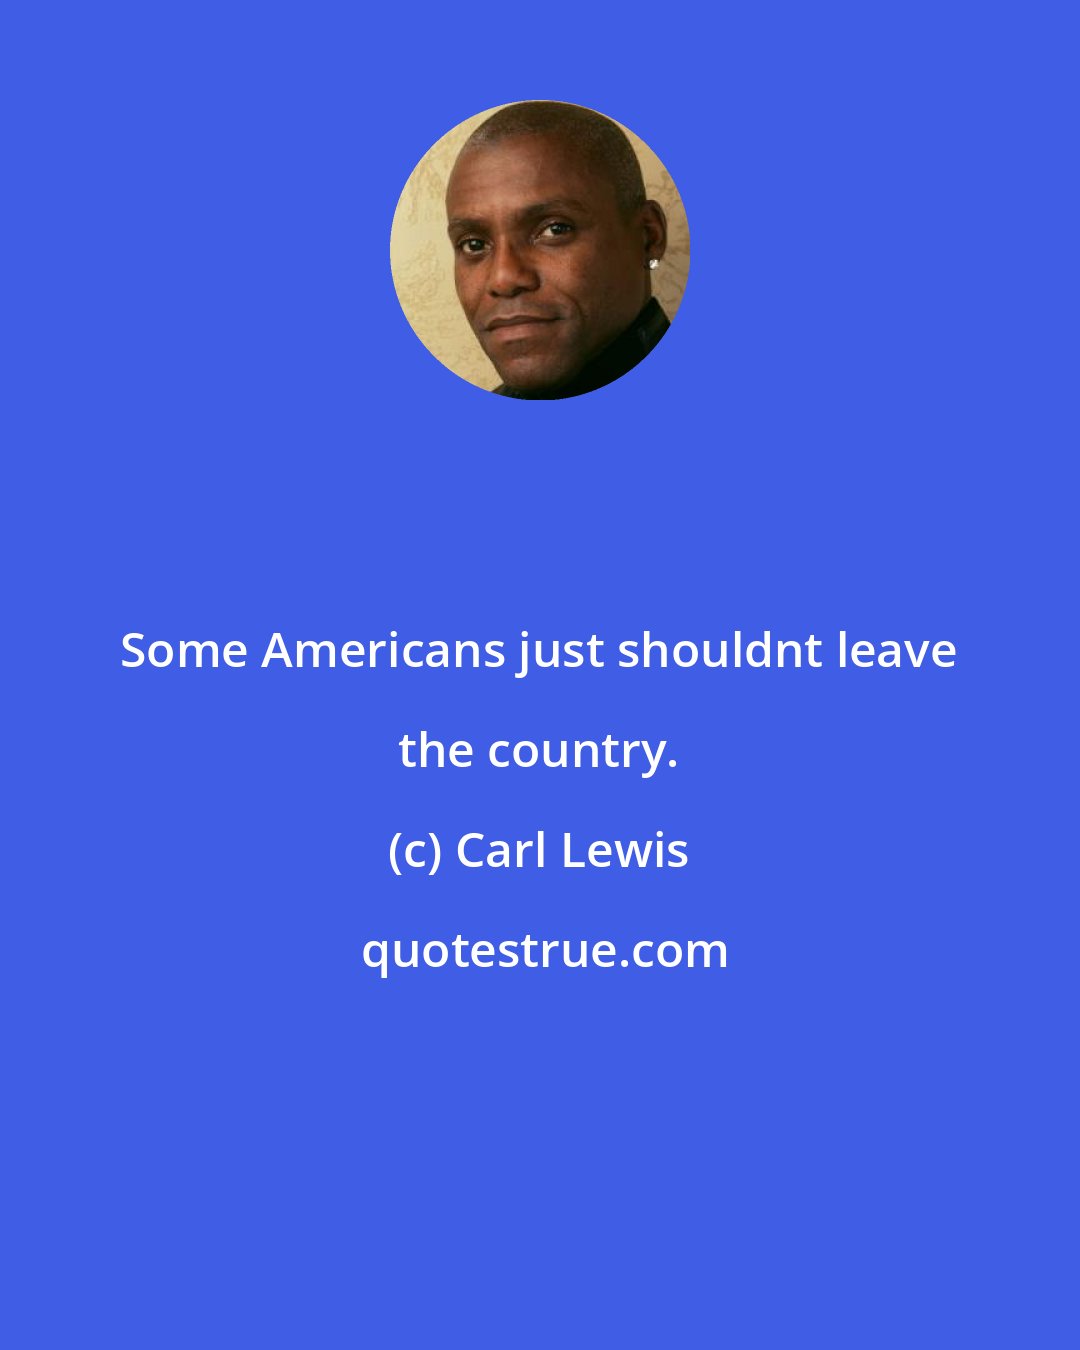 Carl Lewis: Some Americans just shouldnt leave the country.